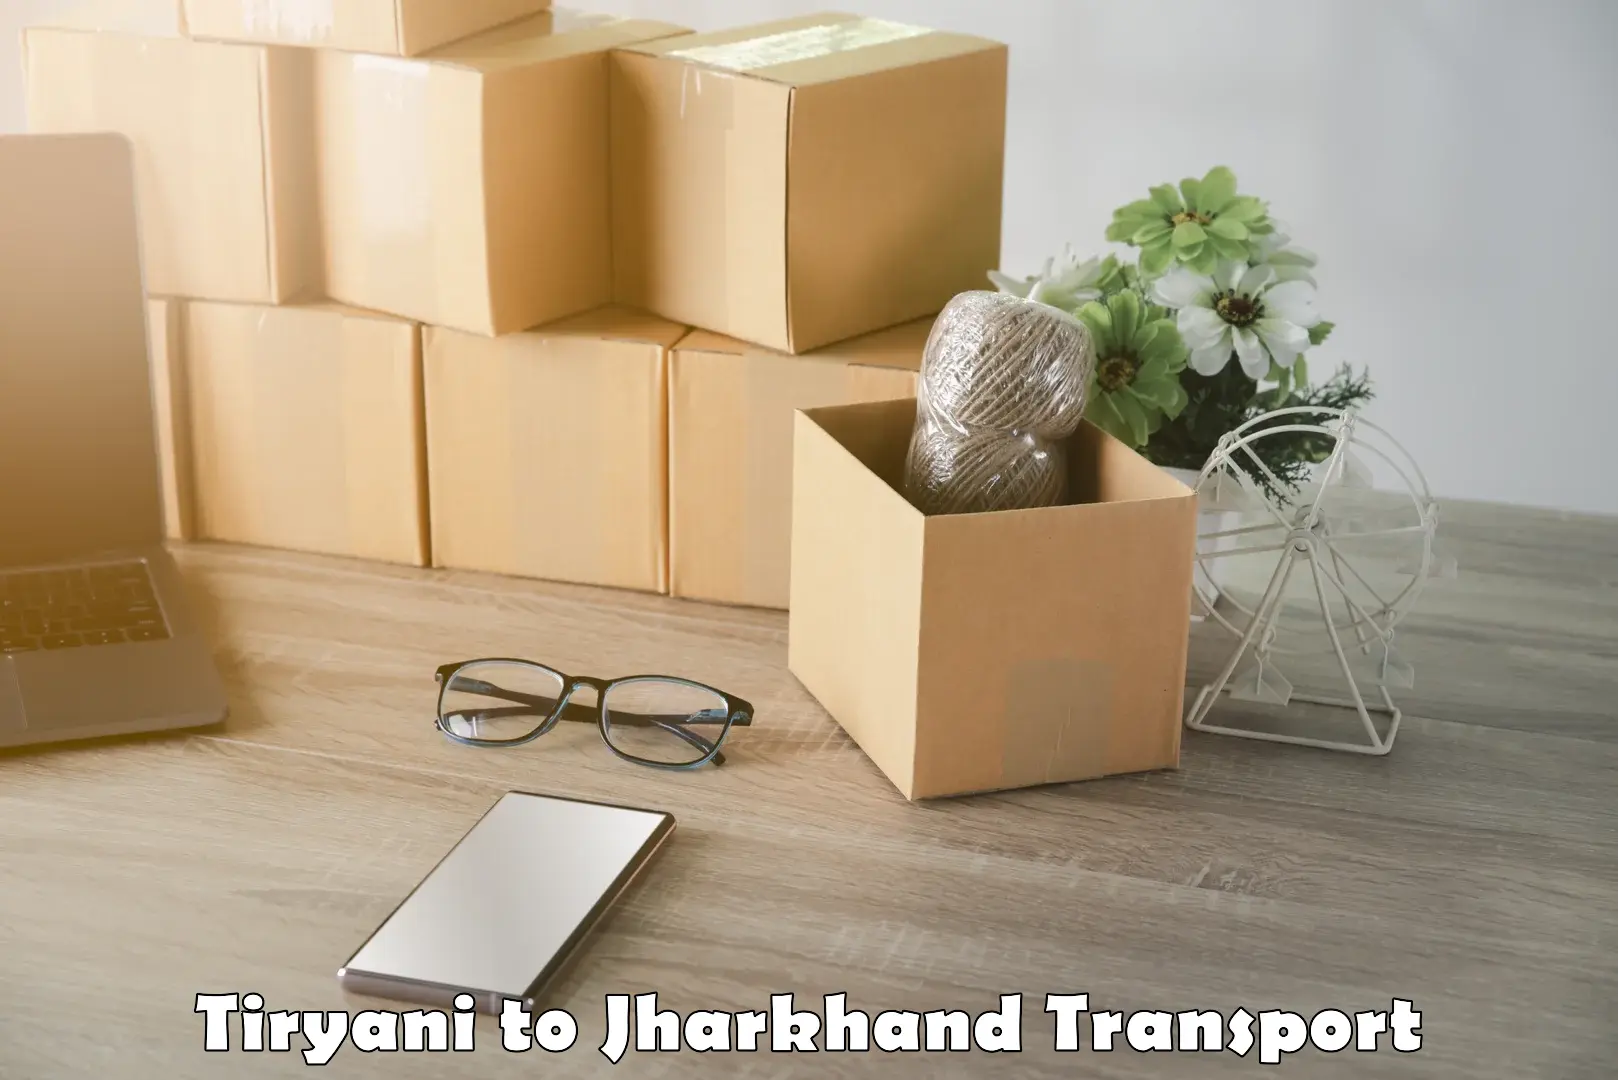 Commercial transport service Tiryani to Ranchi